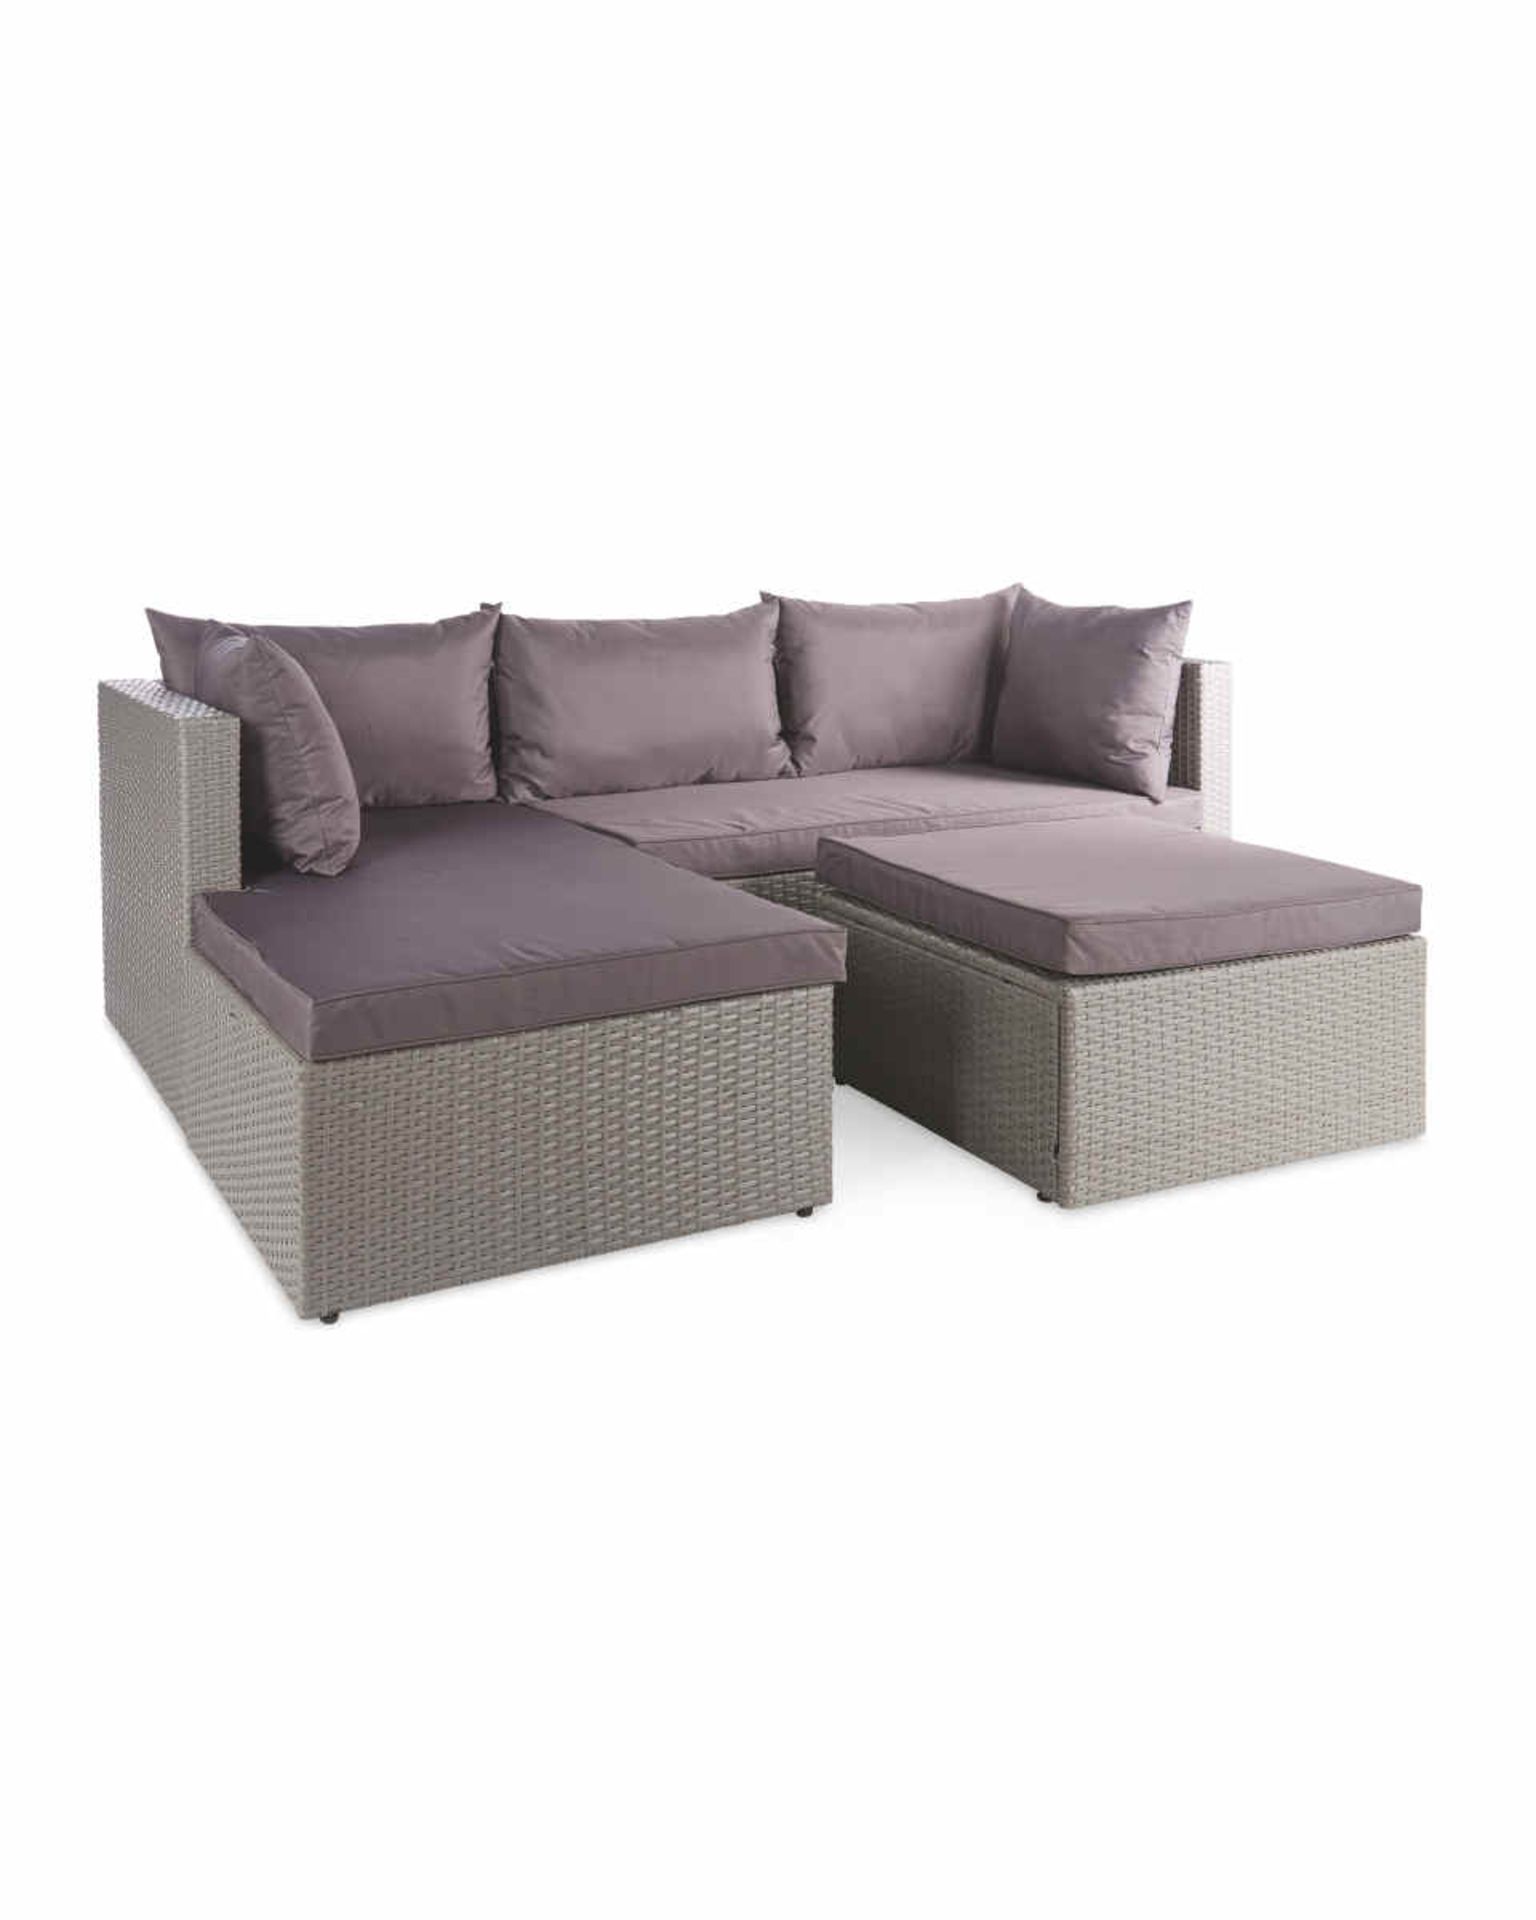 (2118322) Grey Rattan Sofa With Cover - Image 2 of 2